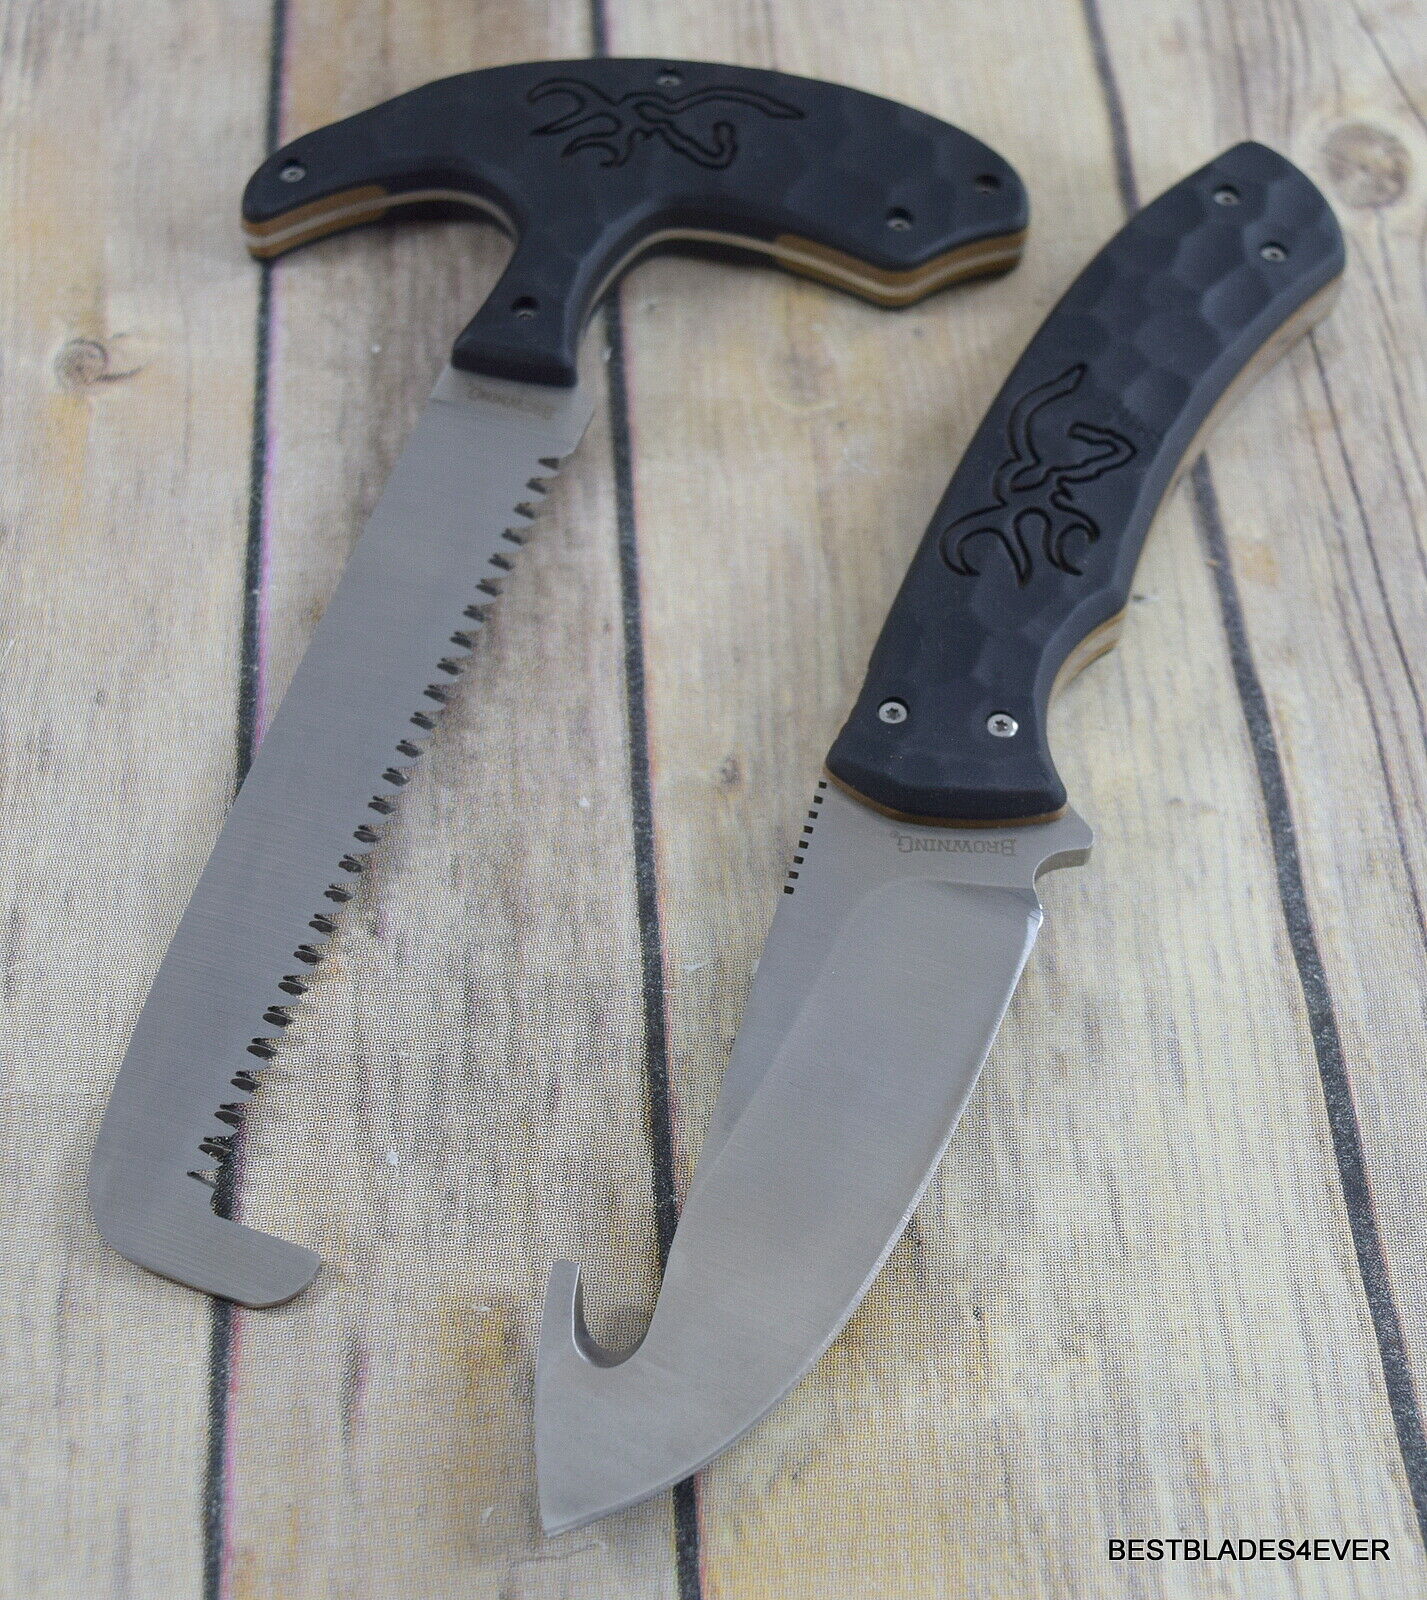 Primal Combo – 6 Piece - Hunting Knives - Browning